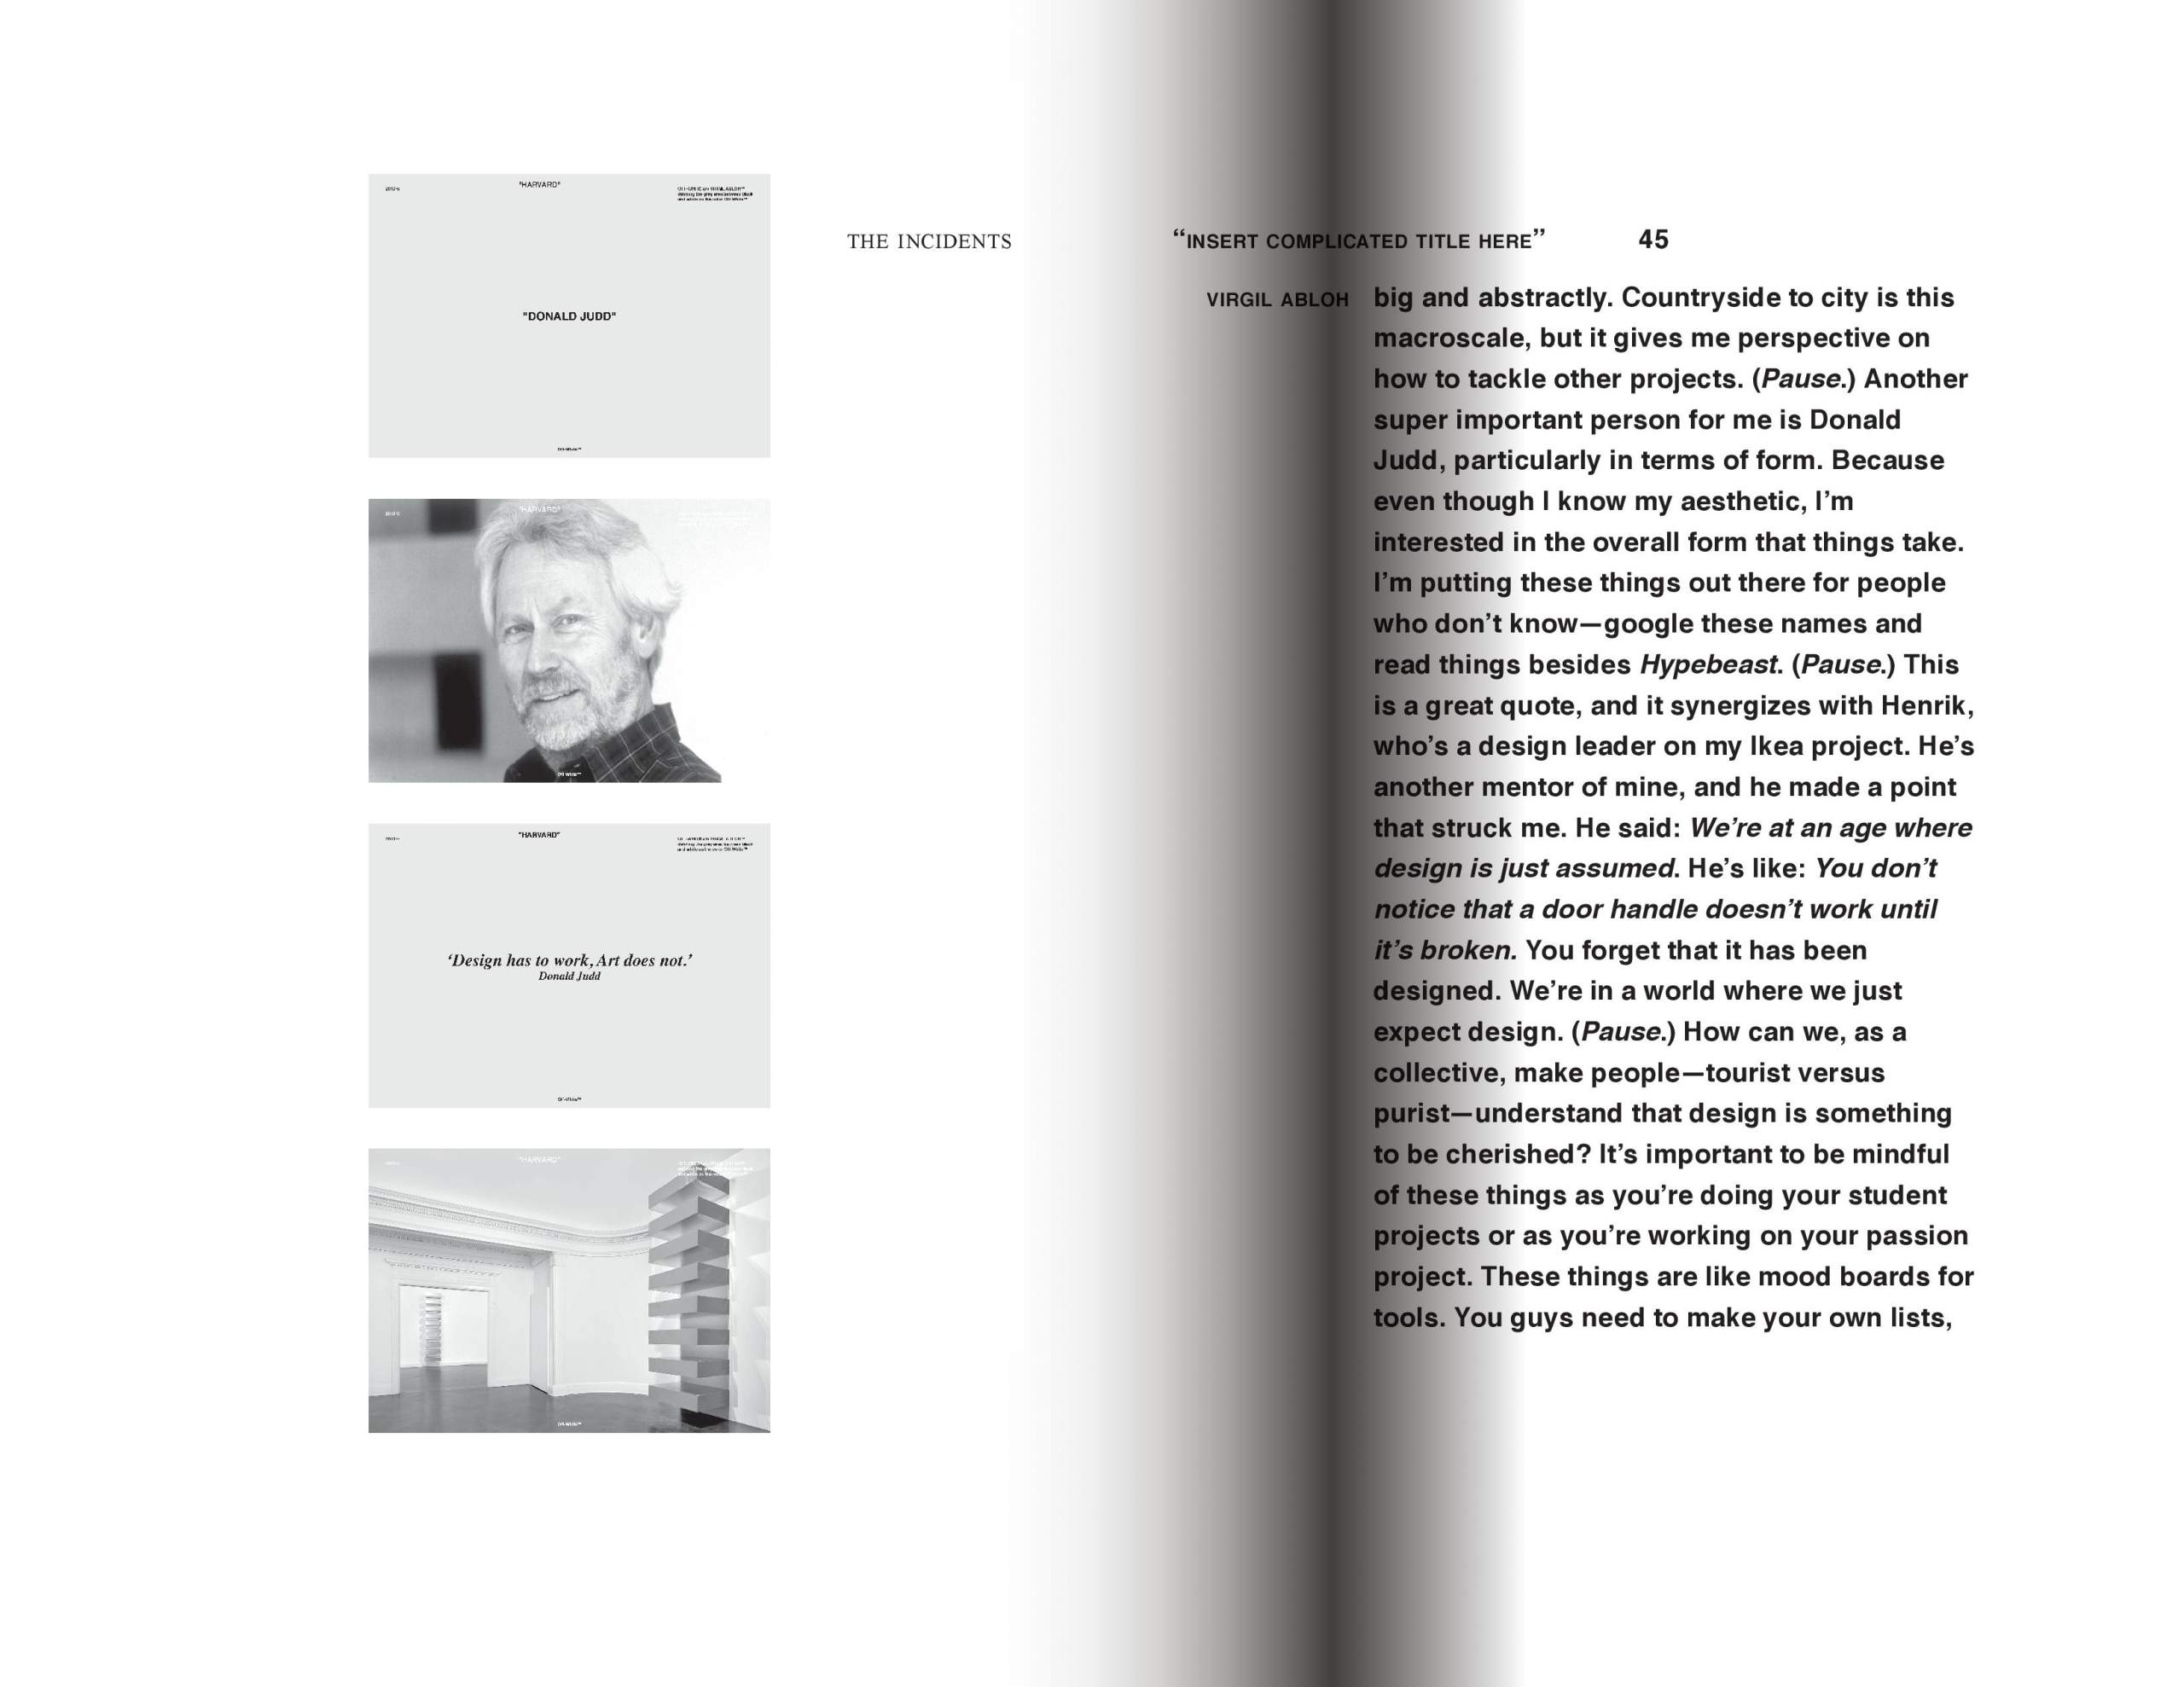 virgil abloh on X: “insert complicated title here” c/o @HarvardGSD now  published in japanese  / X